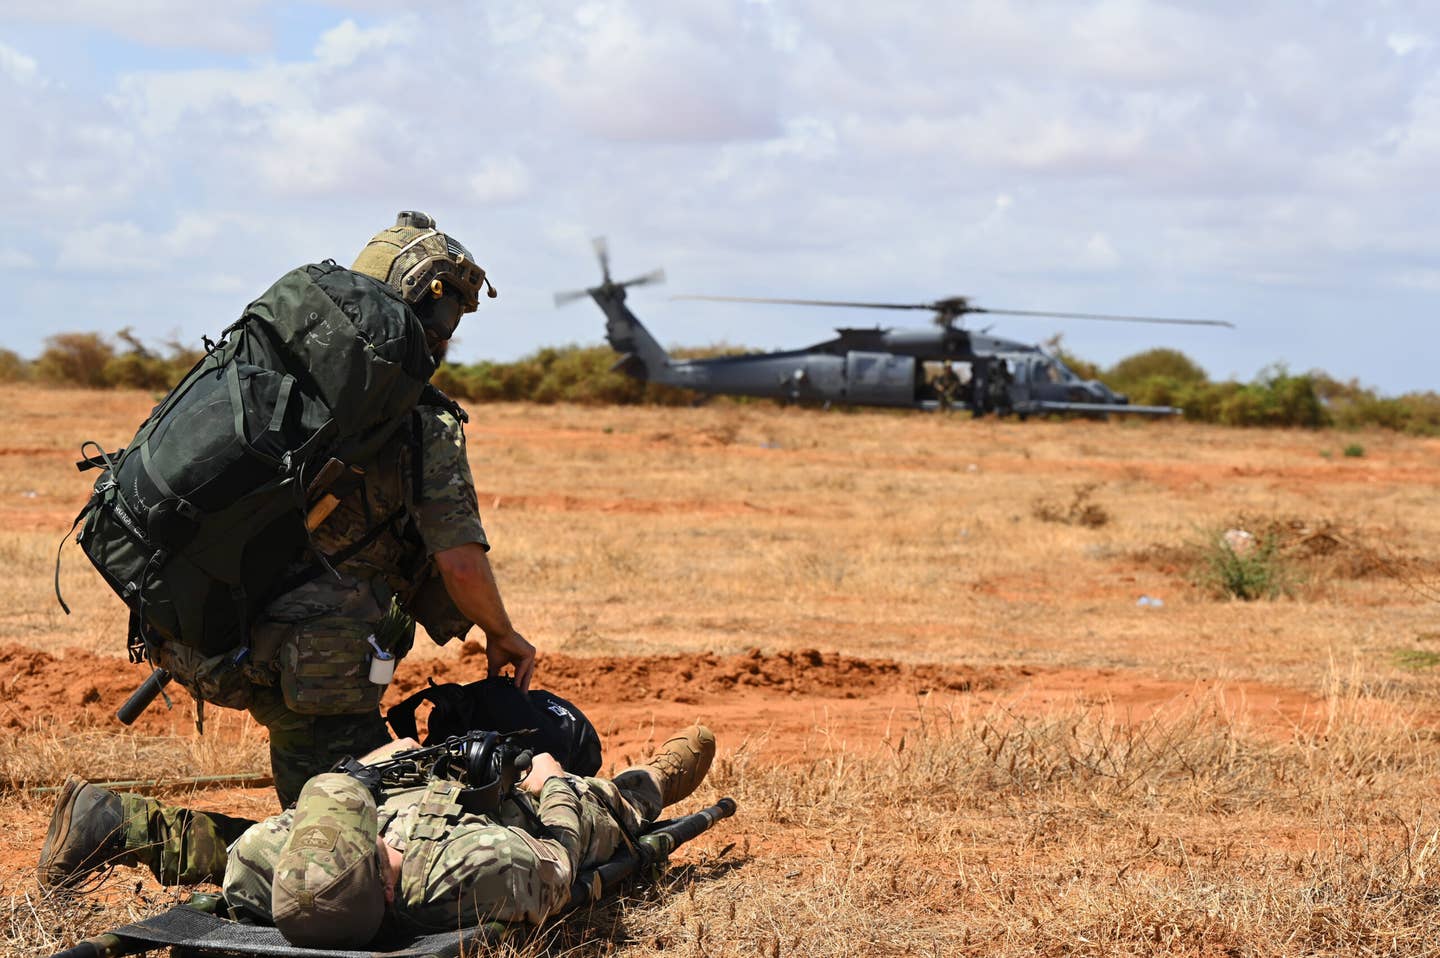 A U.S. Pararescueman prepares to move a simulated casualty to an HH-60W combat rescue helicopter during a CASEVAC exercise while his teammates secure the perimeter at an undisclosed Combined Joint Task Force-Horn of Africa area of responsibility, Dec 8, 2022. <em>Credit: U.S. Air Force photo by Tech. Sgt. Jayson Burns</em>